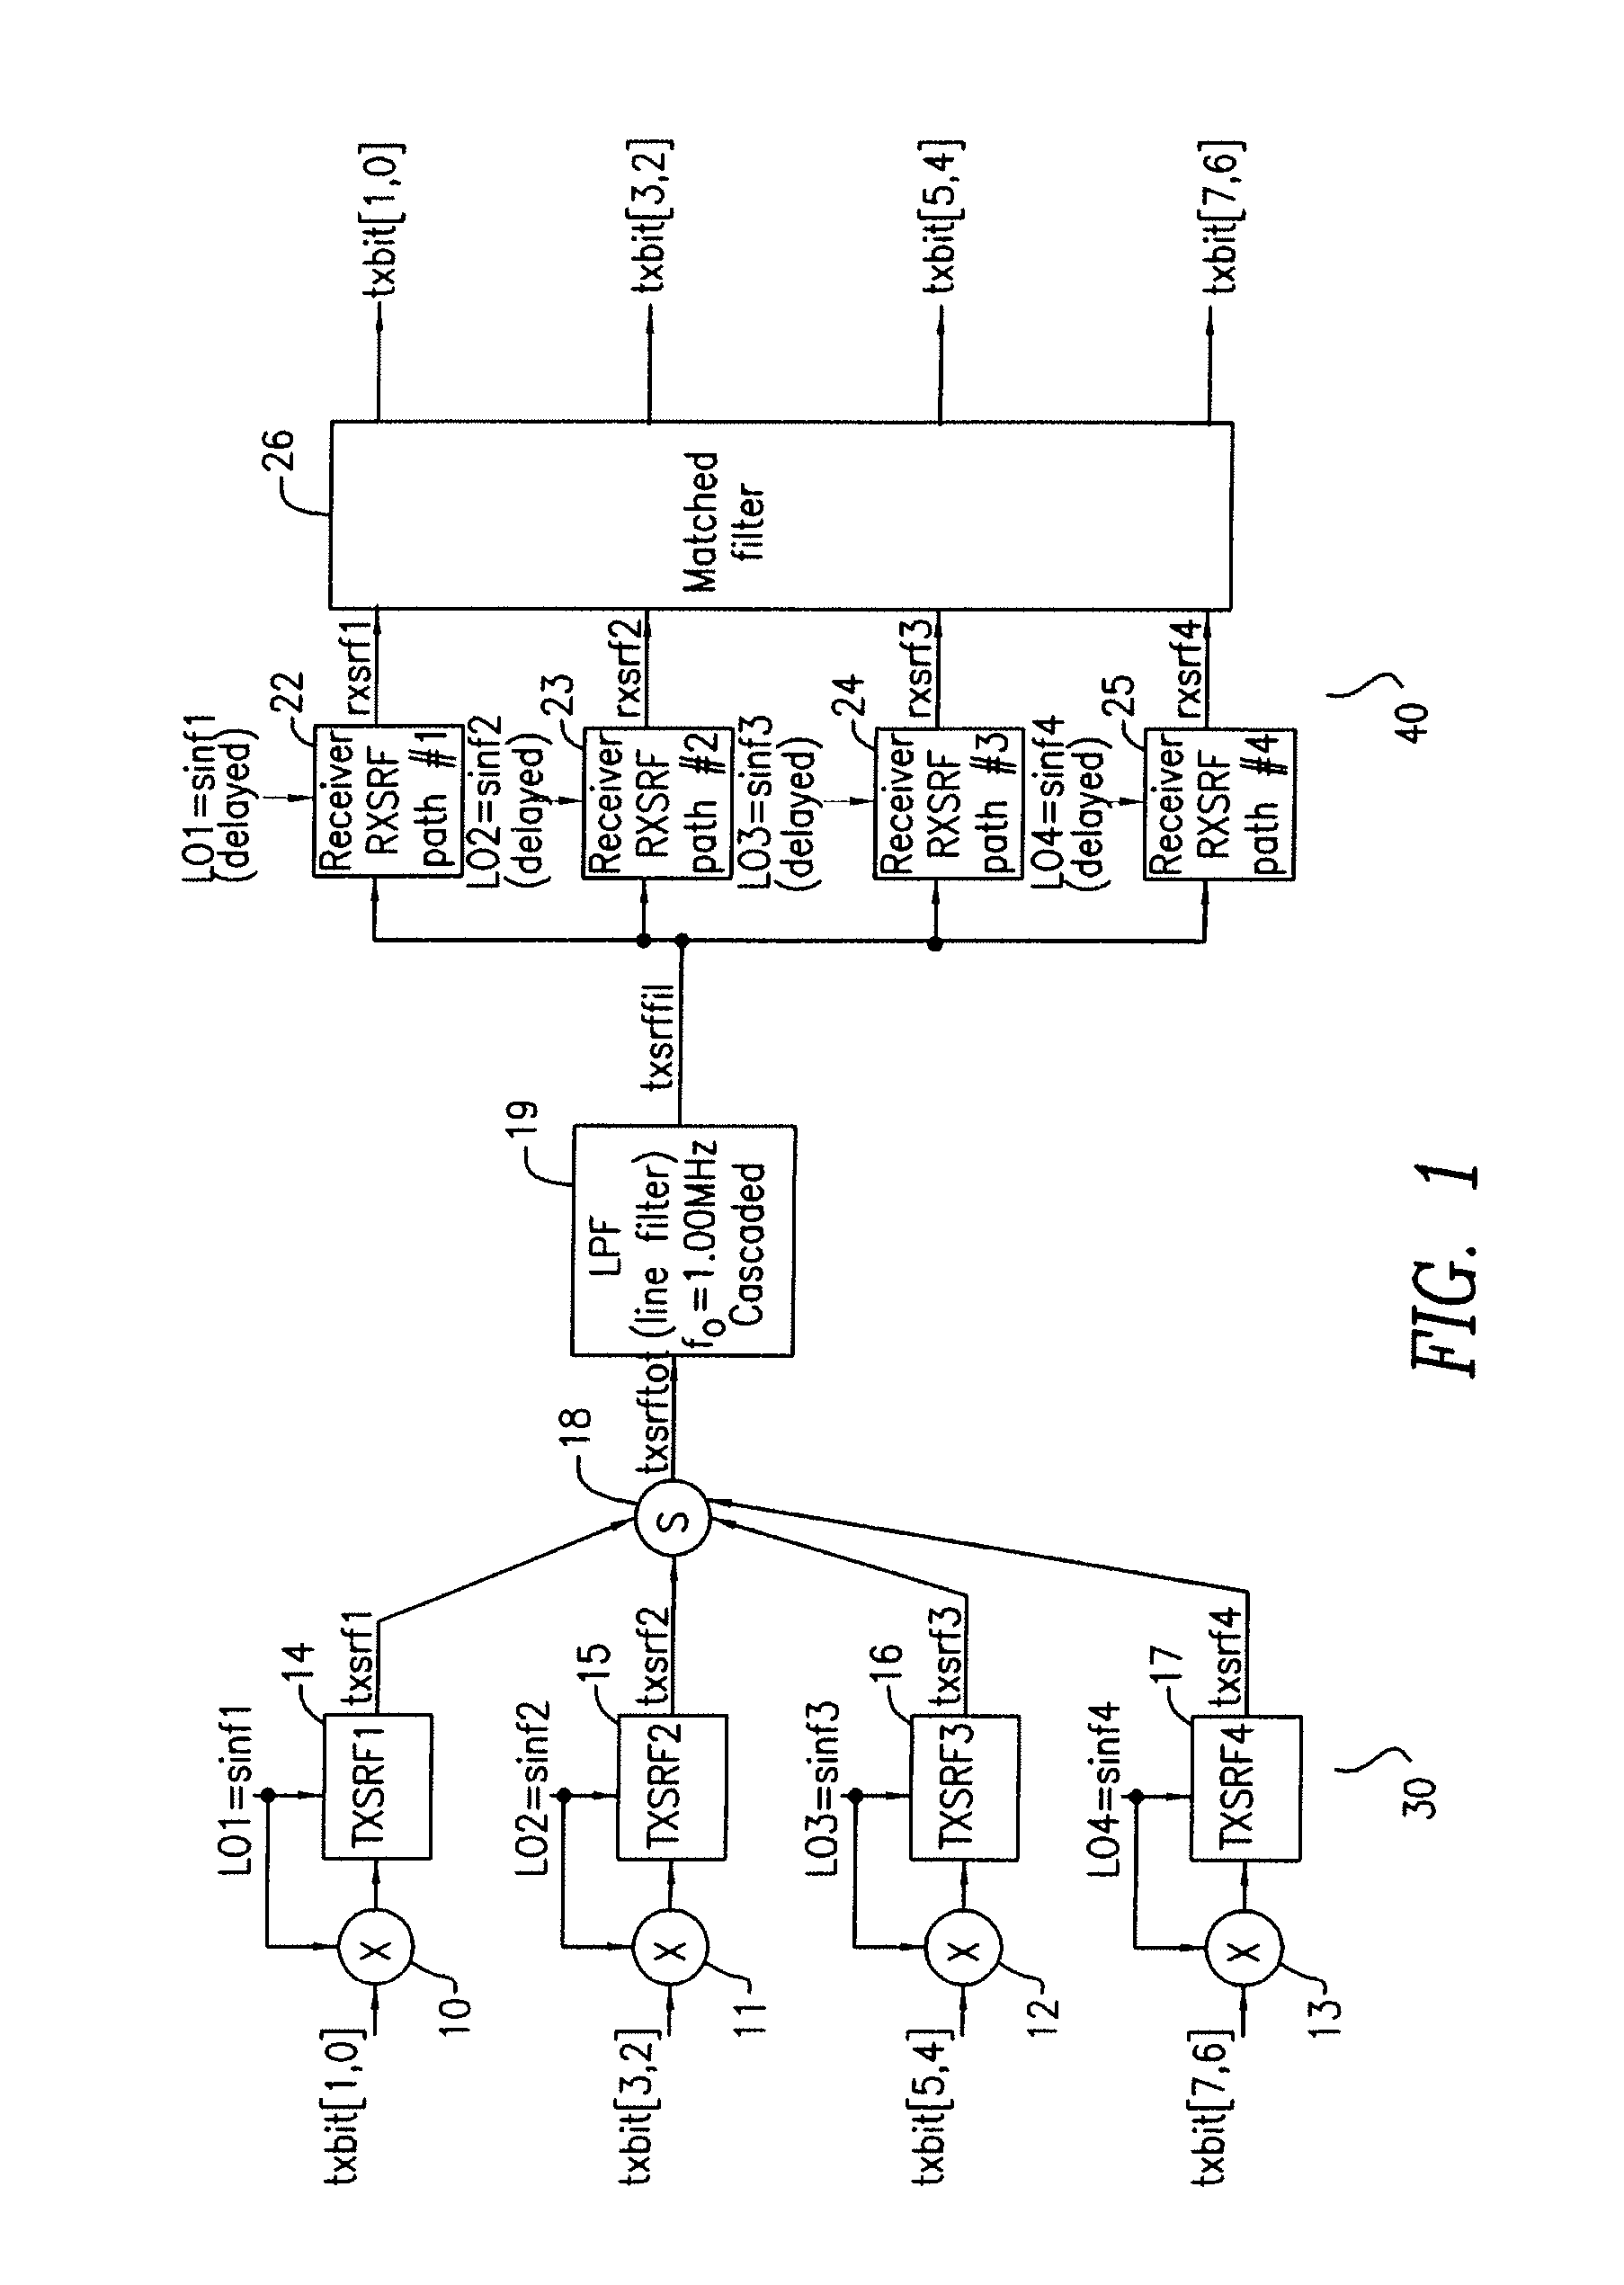 Method and apparatus for increasing the channel capacity of a bandwidth limited communications path